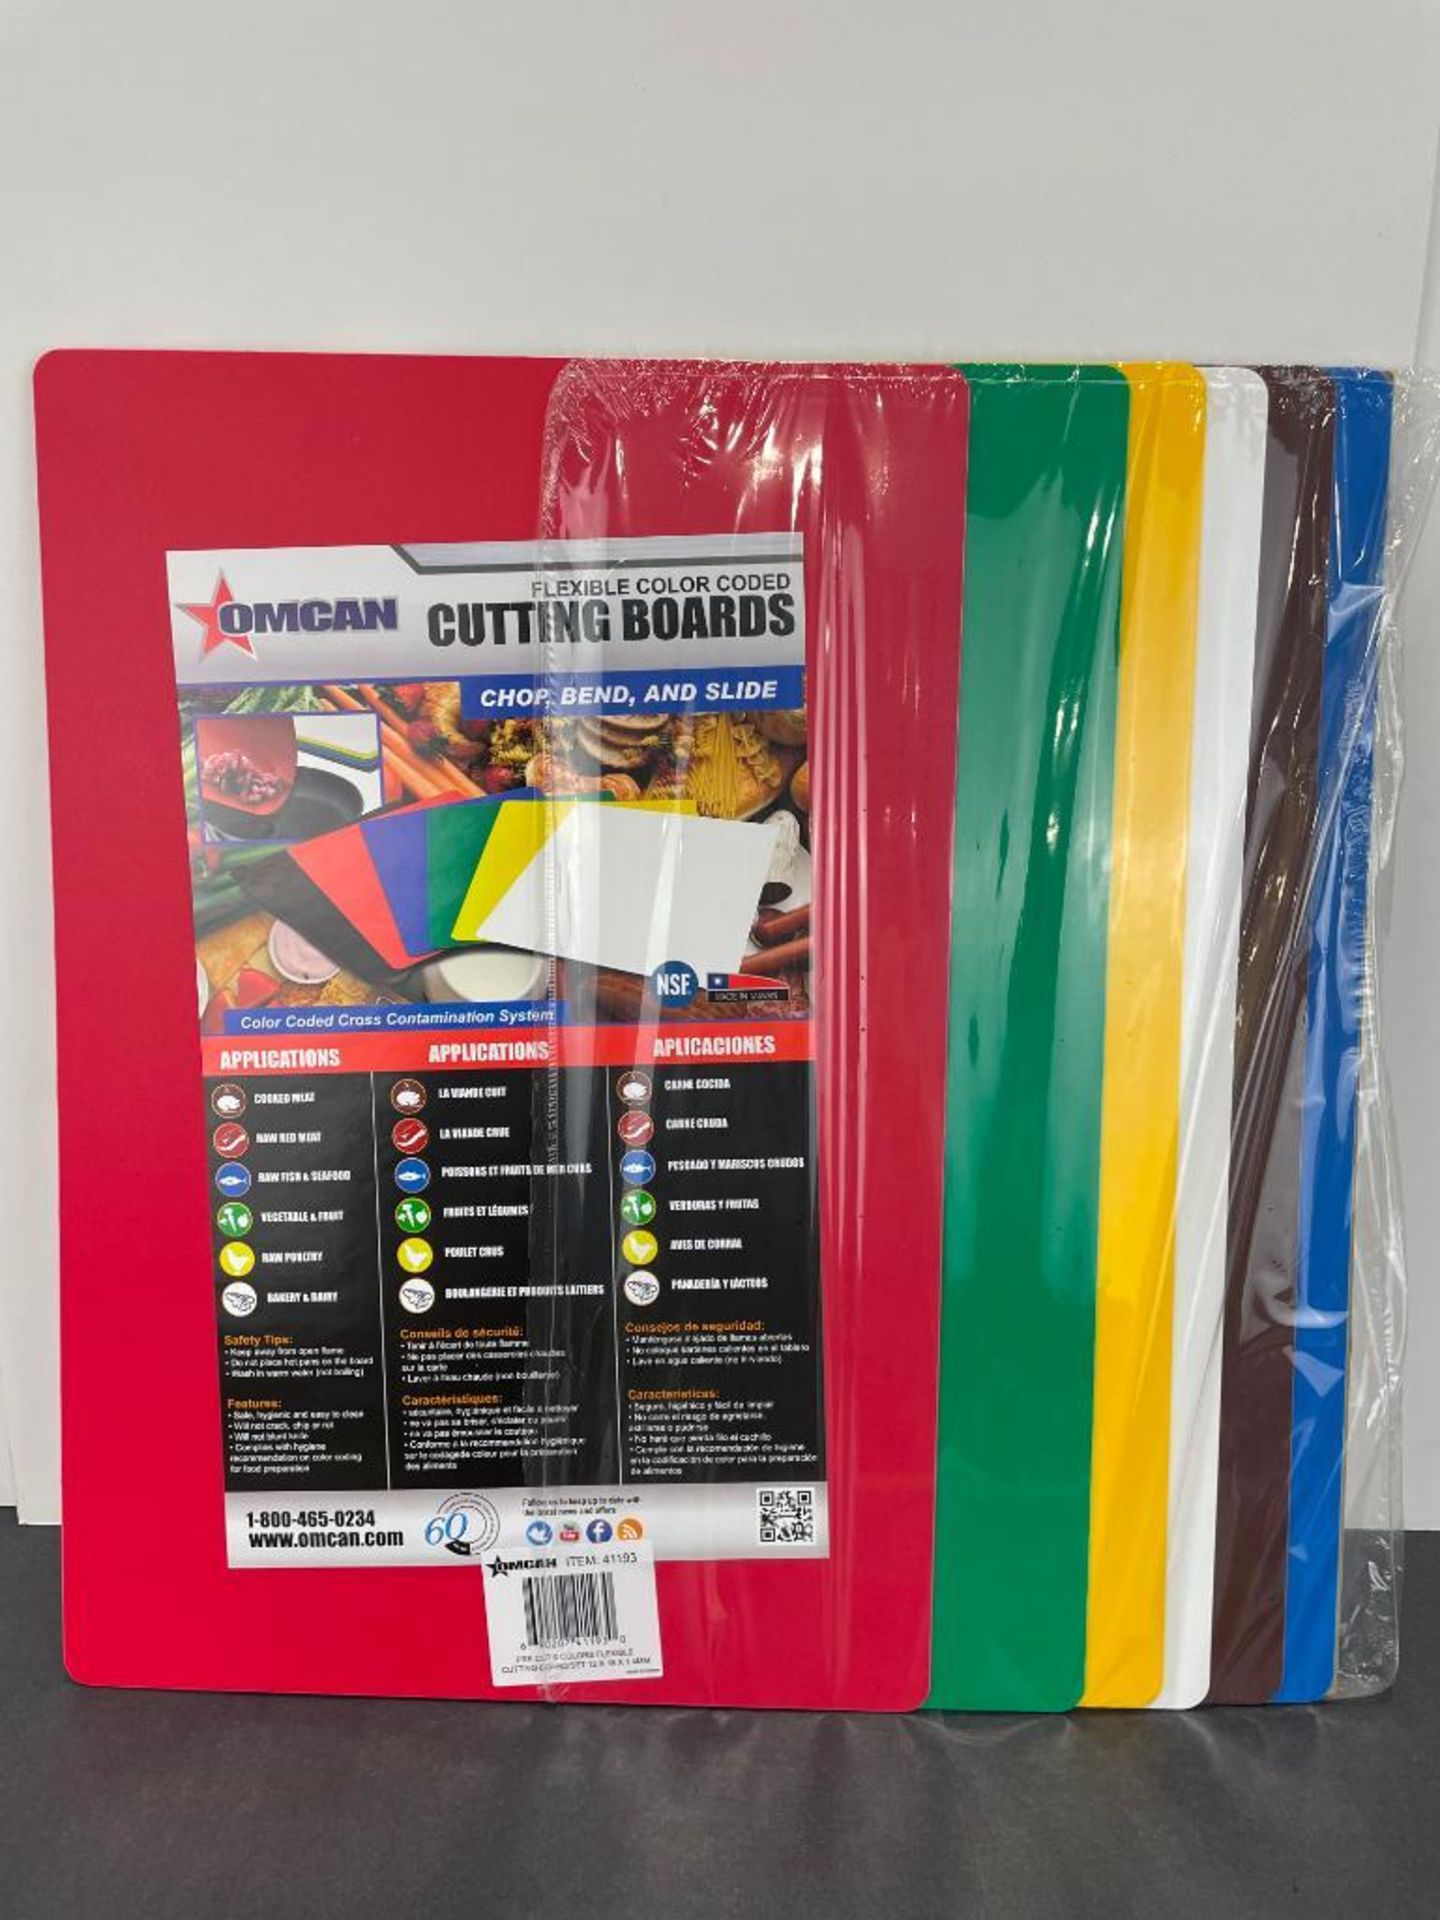 12" X 18" COLOUR-CODED FLEXIBLE CUTTING BOARDS - Image 4 of 5